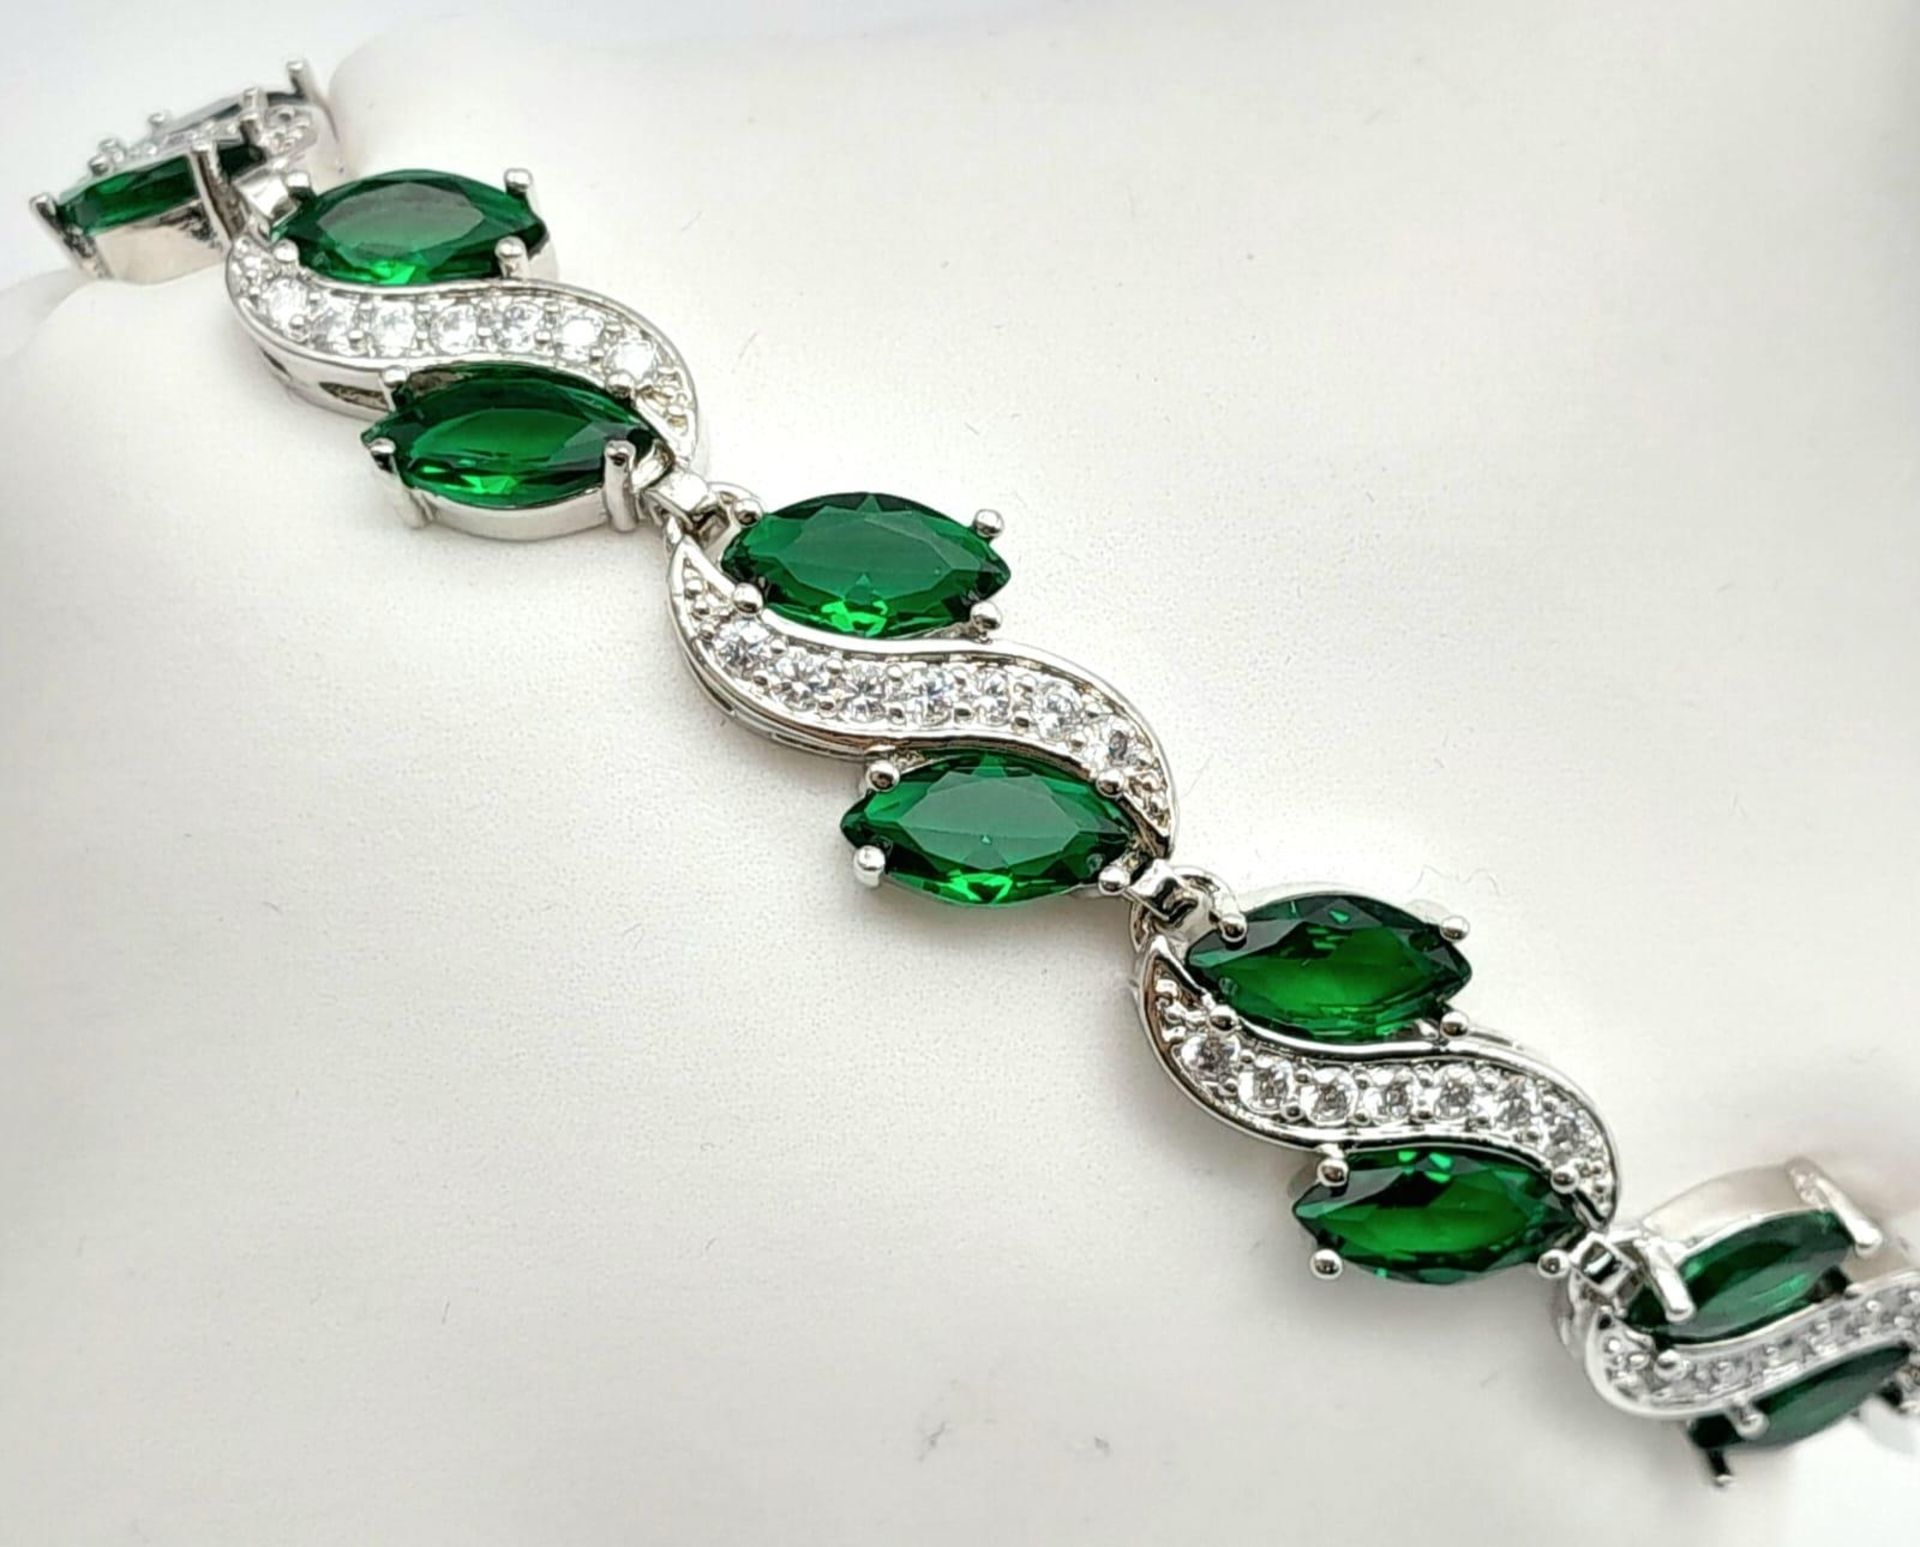 An exact reproduction of a piece of jewellery (bracelet) worn by Jacqueline Bouvier Kennedy, First